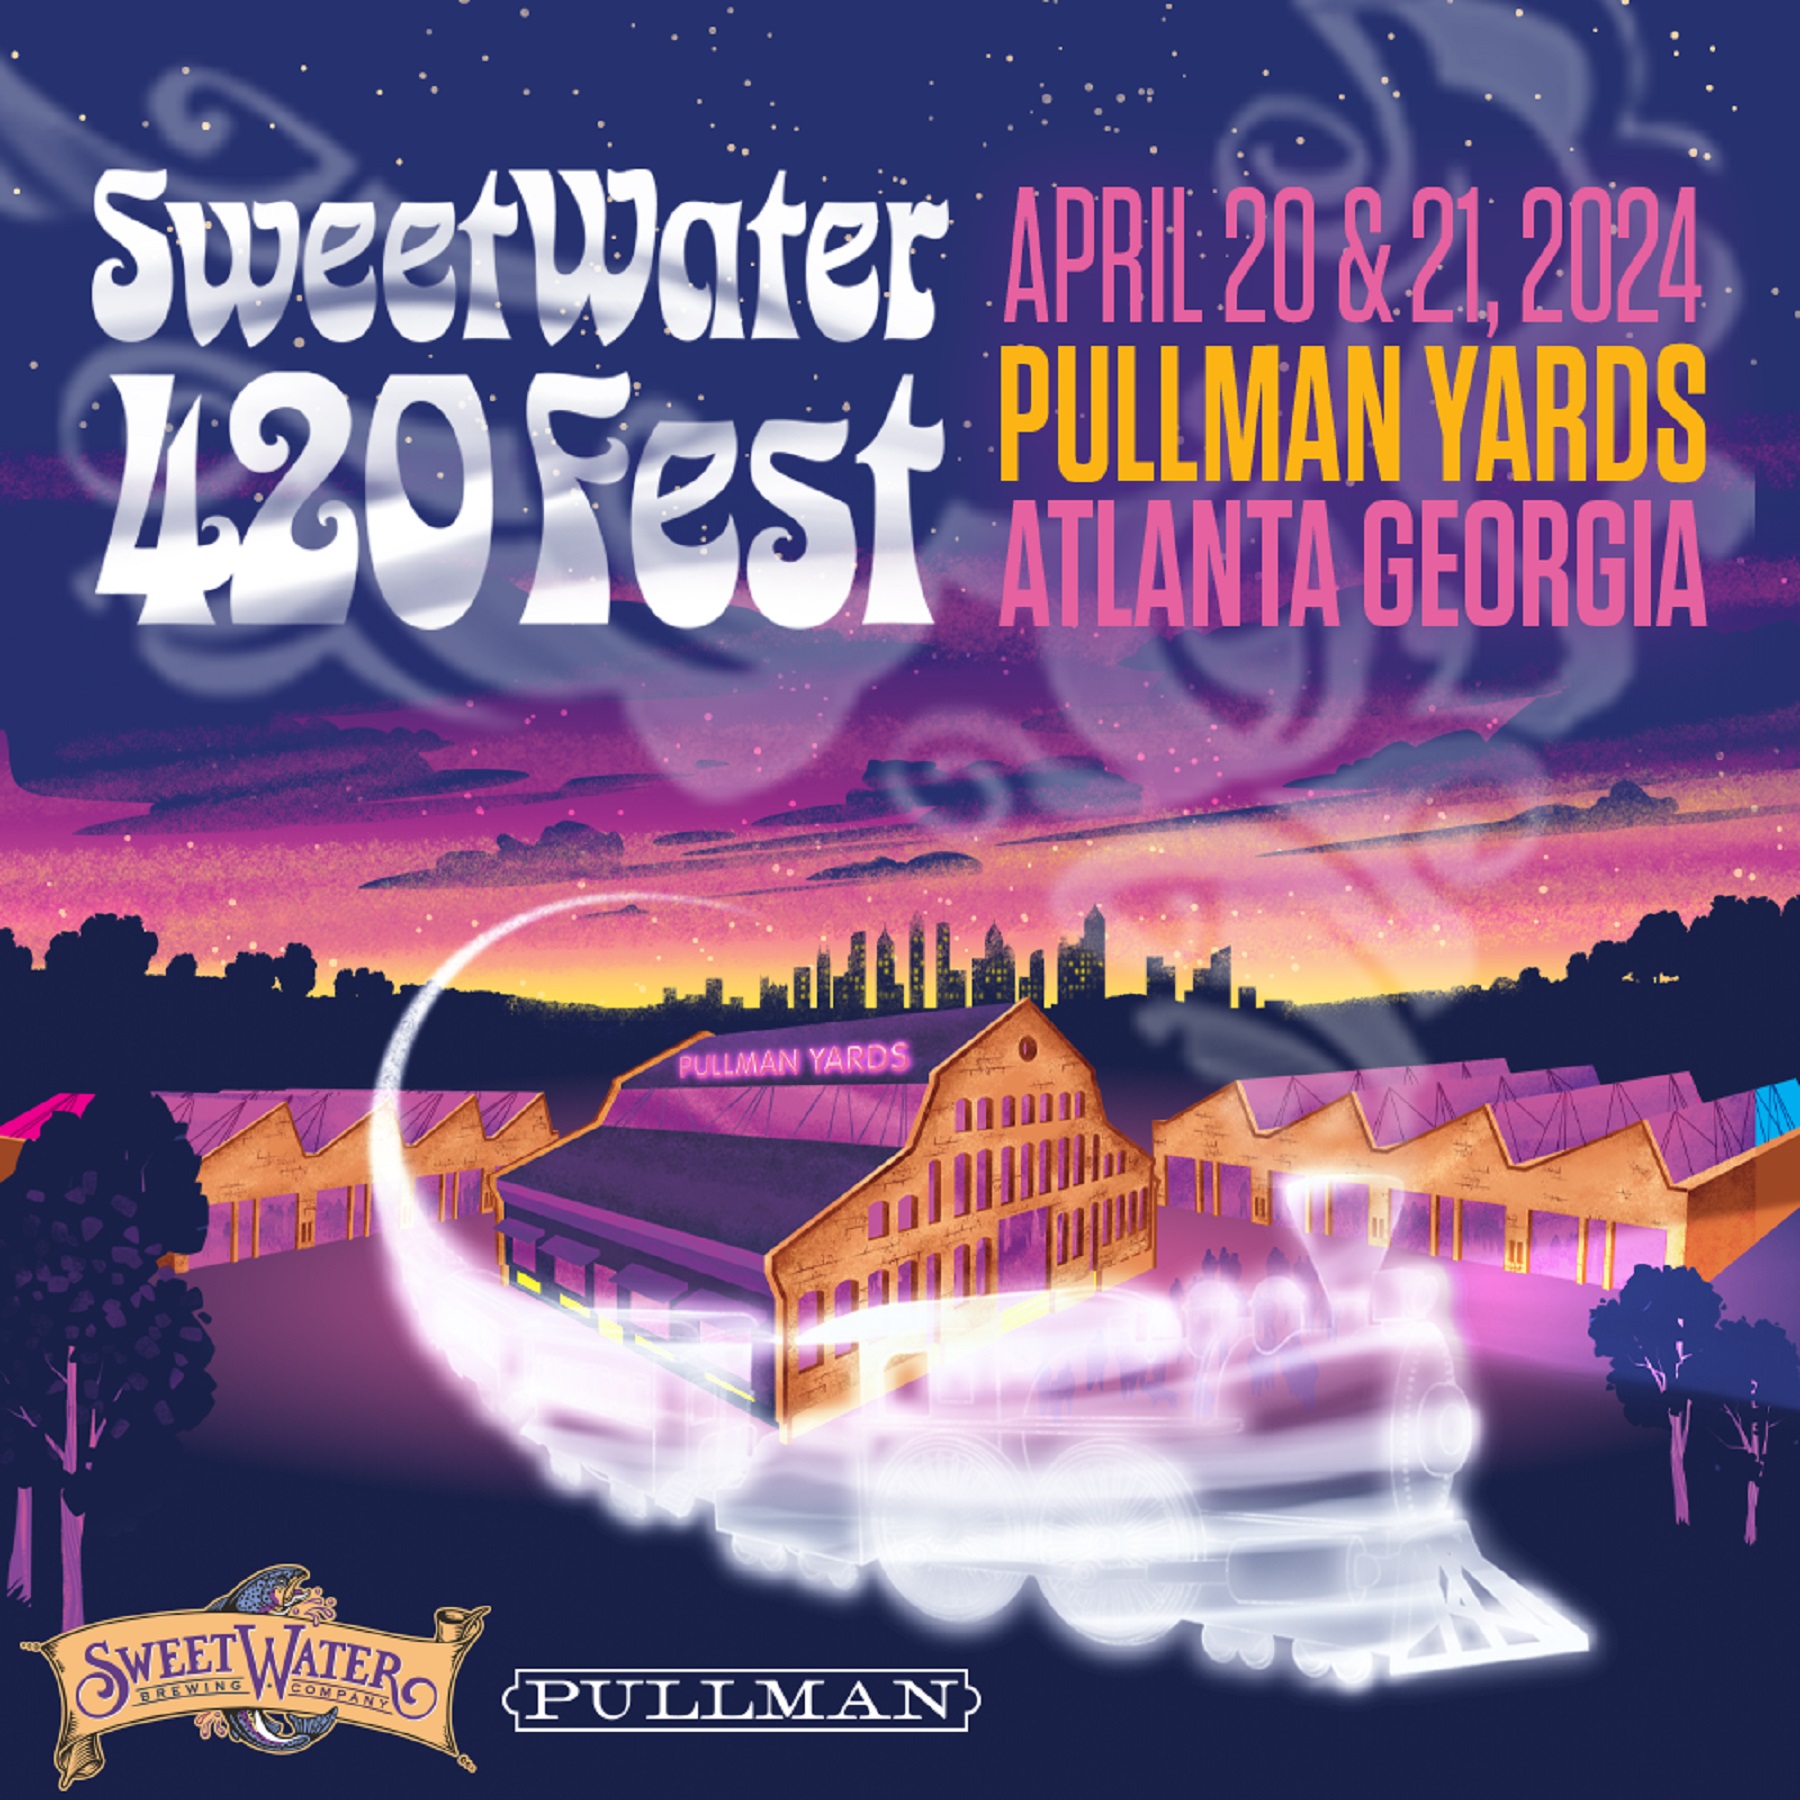 SWEETWATER BREWING AND PULLMAN YARDS PRESENT 420 FEST, APRIL 20 & 21, 2024